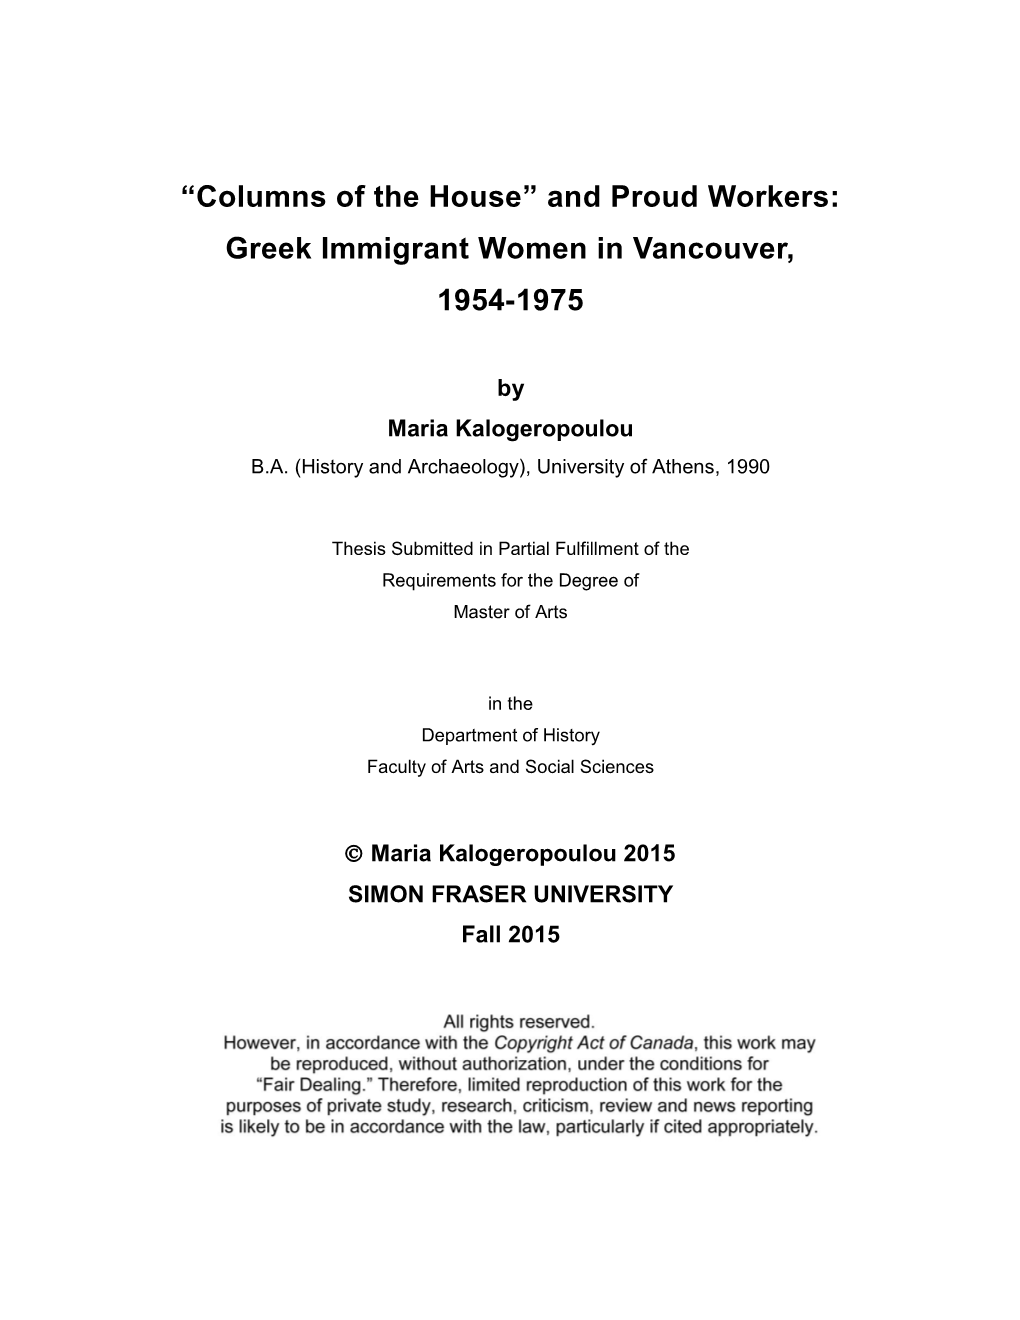 And Proud Workers: Greek Immigrant Women in Vancouver, 1954-1975